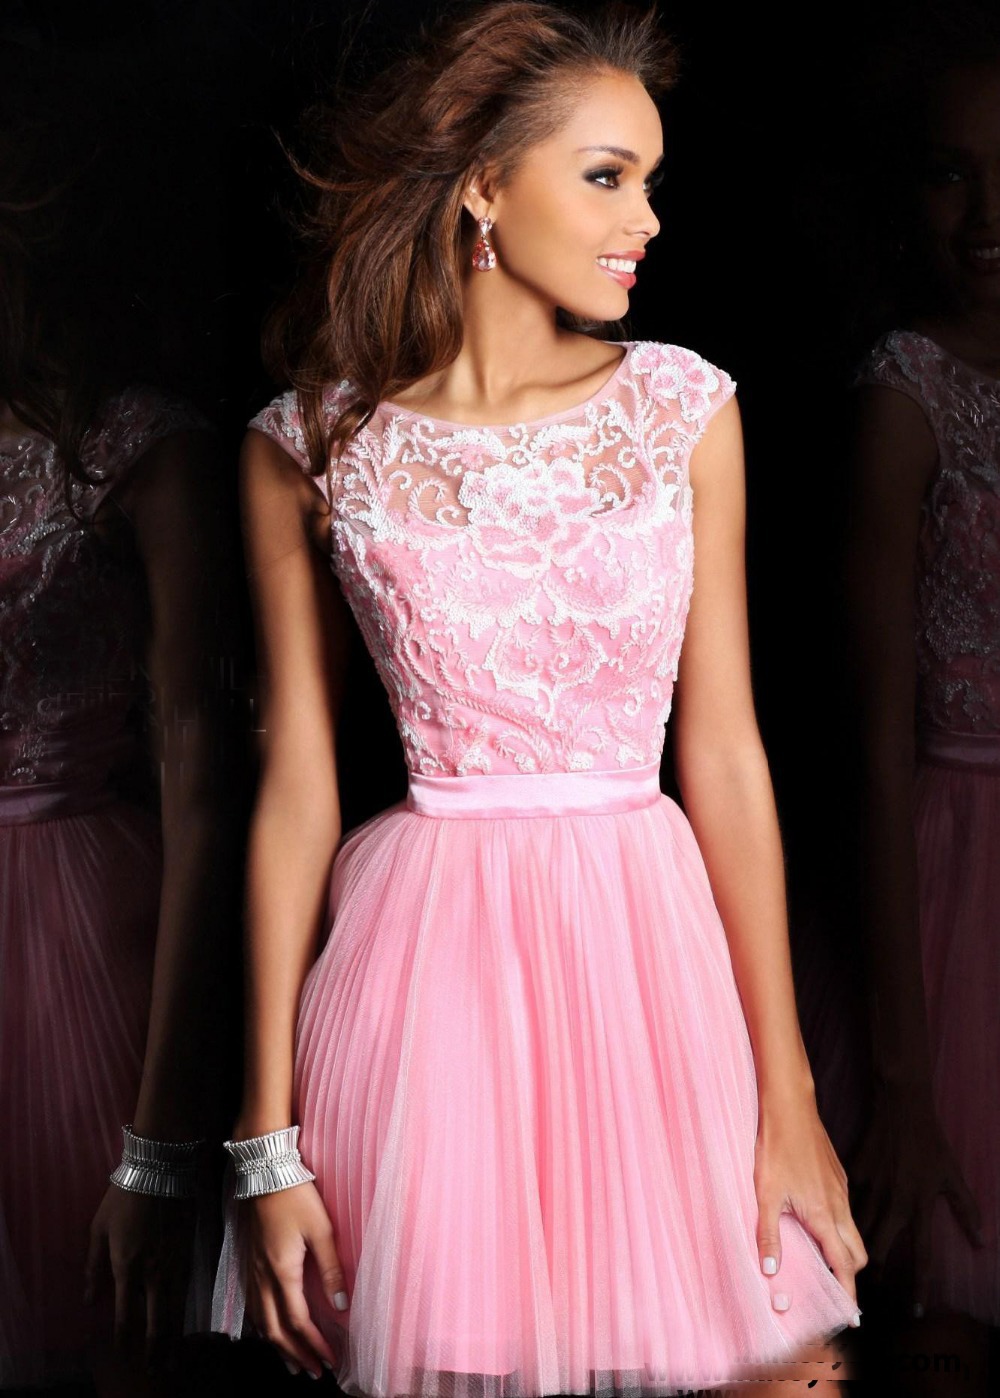 Classy Homecoming Dresses - Cocktail Dresses 2016